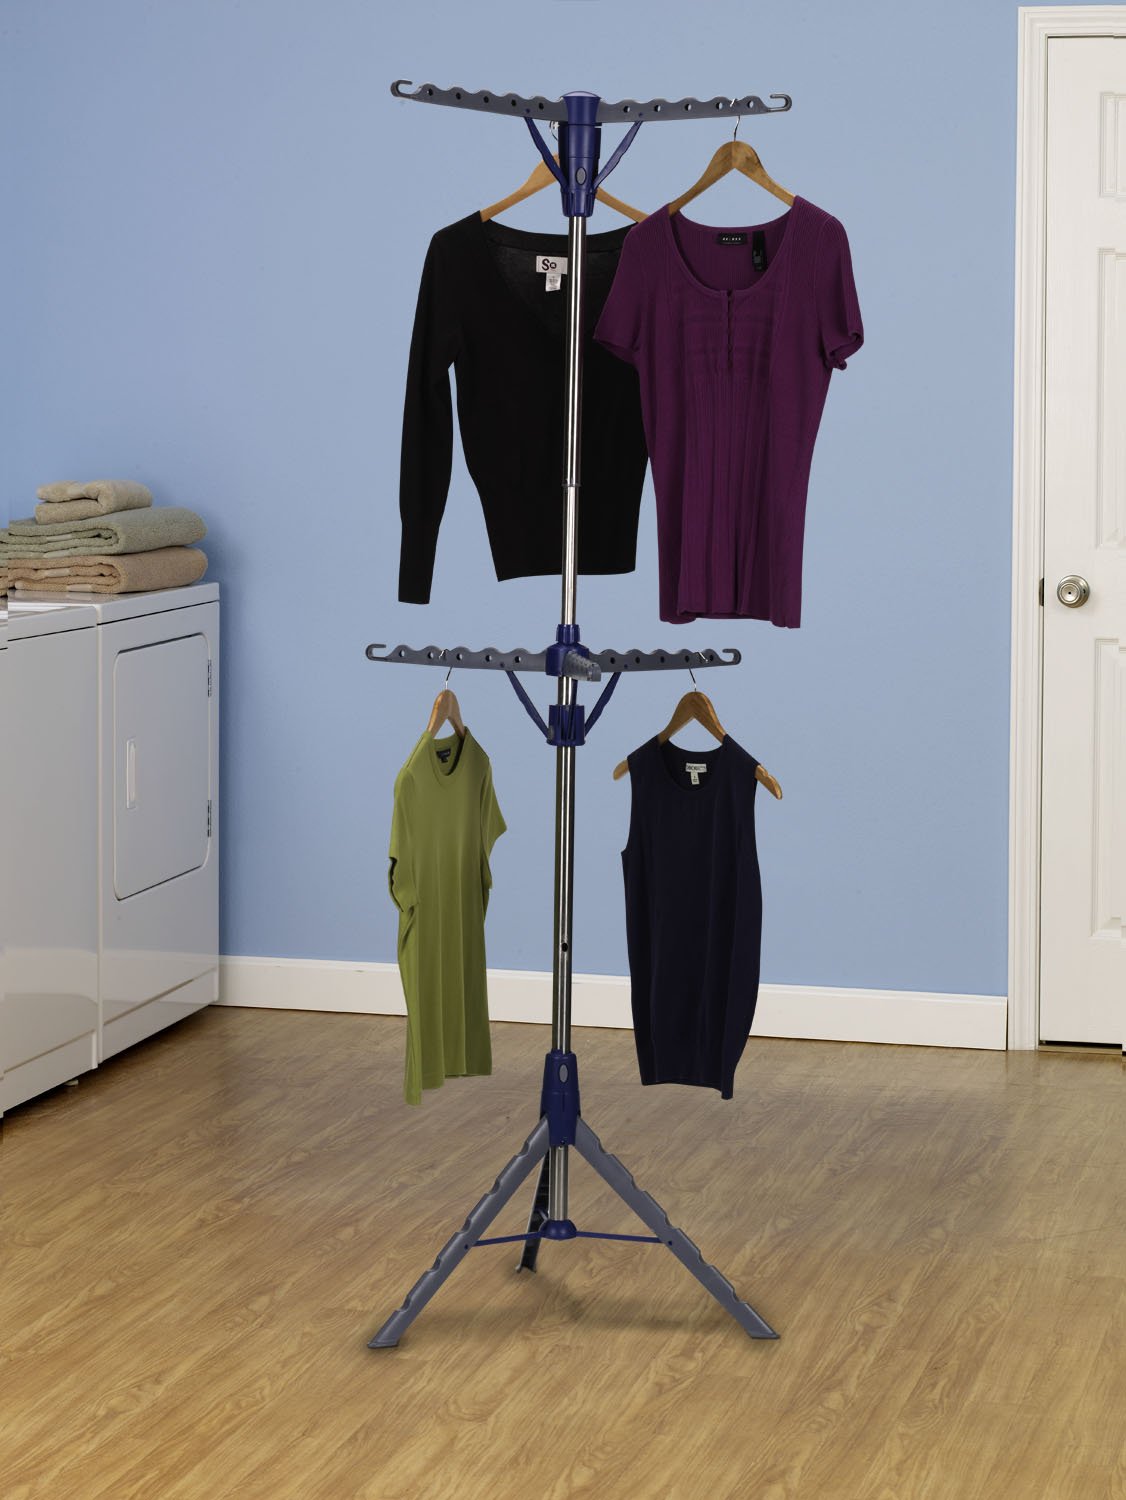 Household Essentials 5012-1 Portable 2-Tier Clothes Drying Rack Tri-Pod | Dry Wet Laundry Or Hang Clothes | Silver And Blue